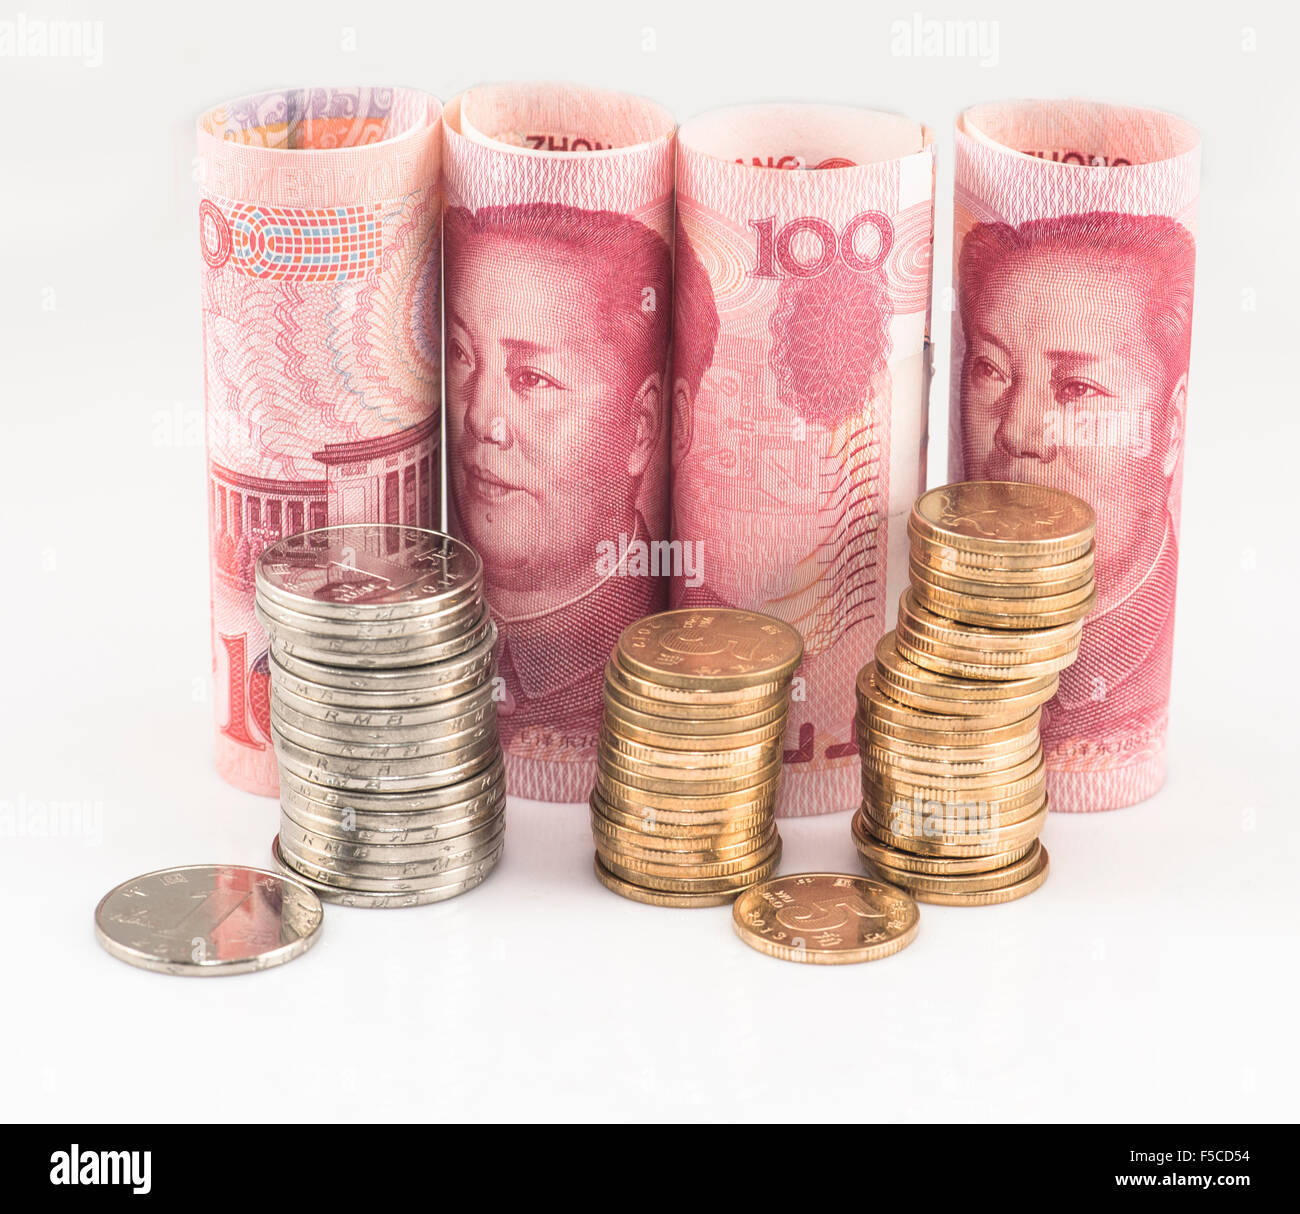 Chinese renminbi 100 bank note and coins Stock Photo